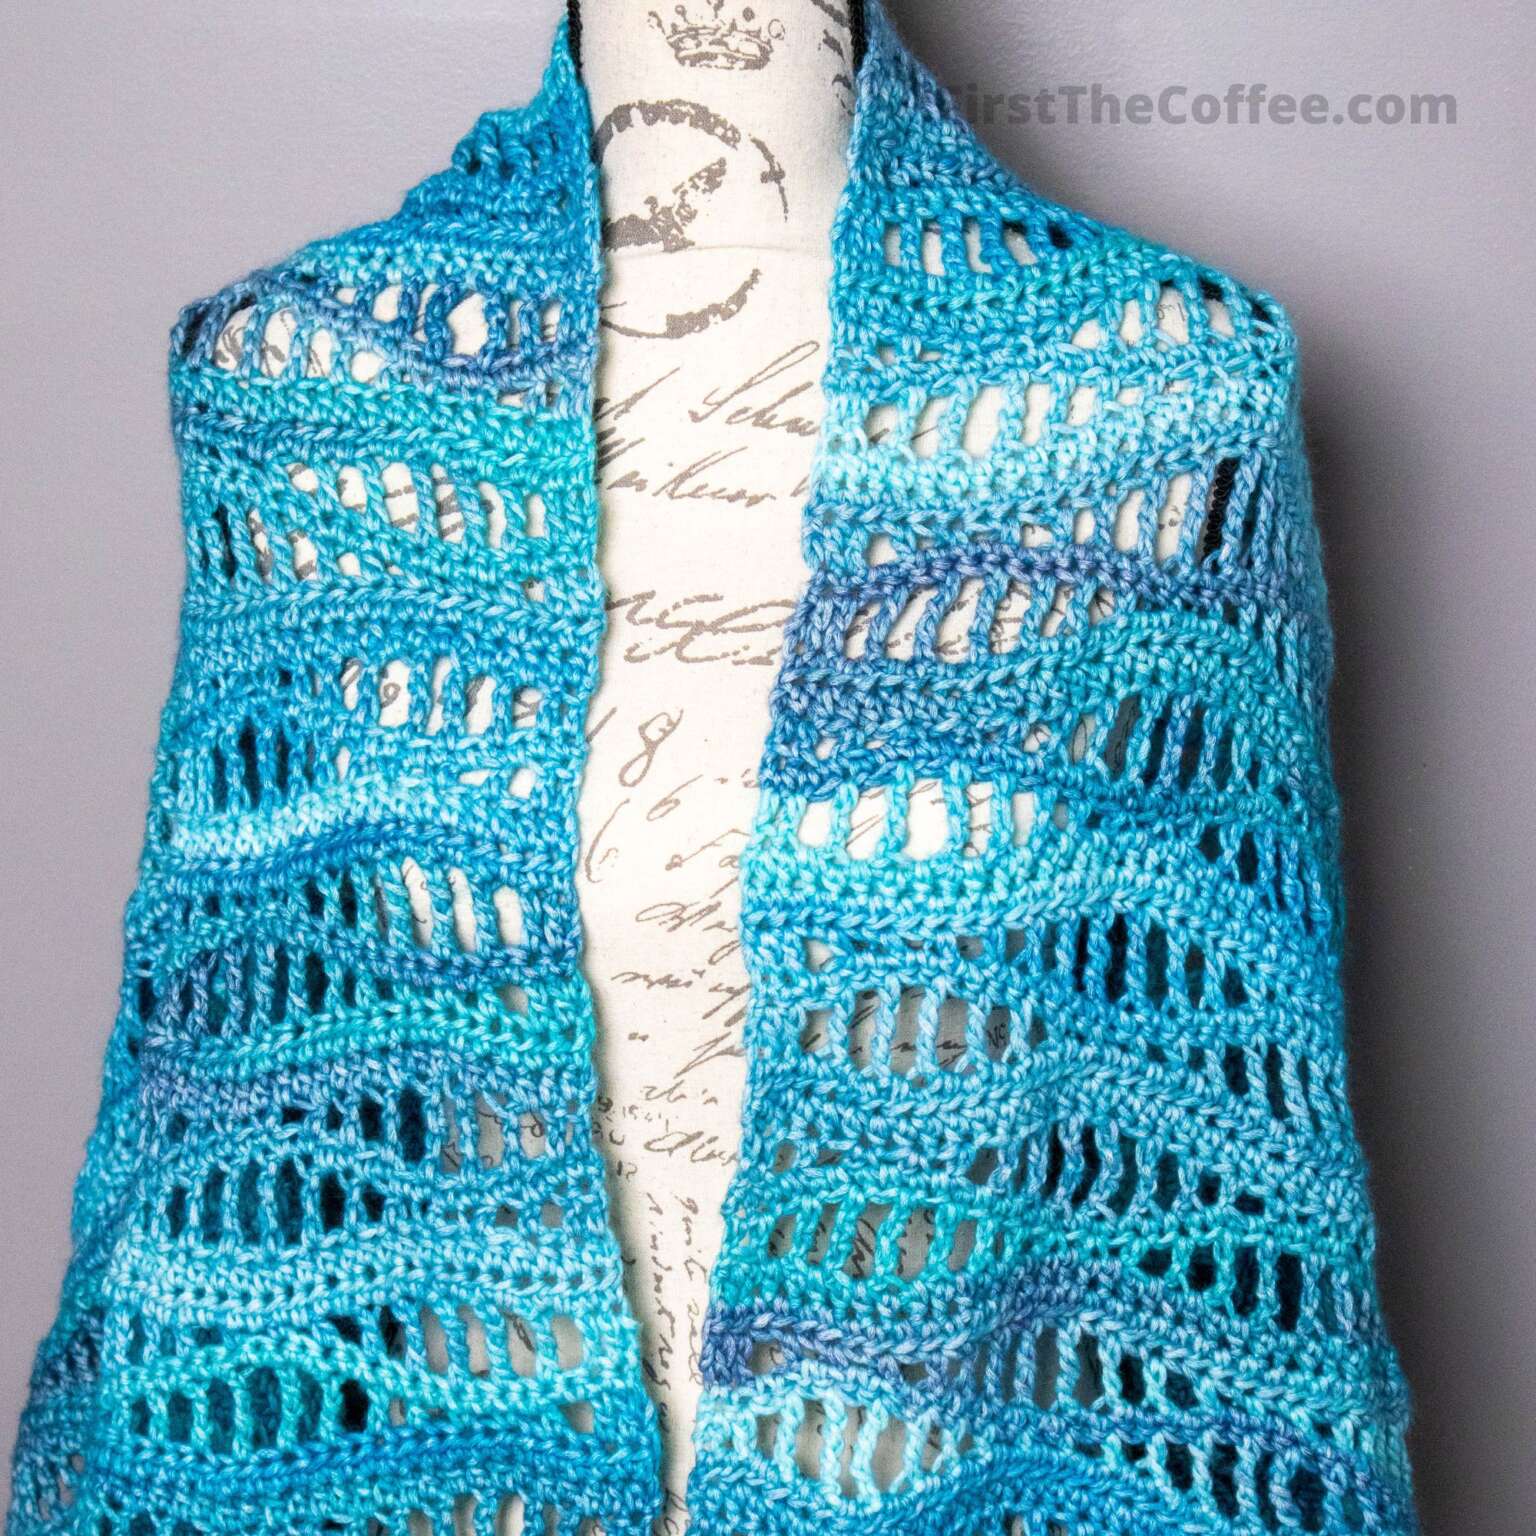 Turquoise Lakes Crochet Shawl Pattern - First The Coffee Crochet